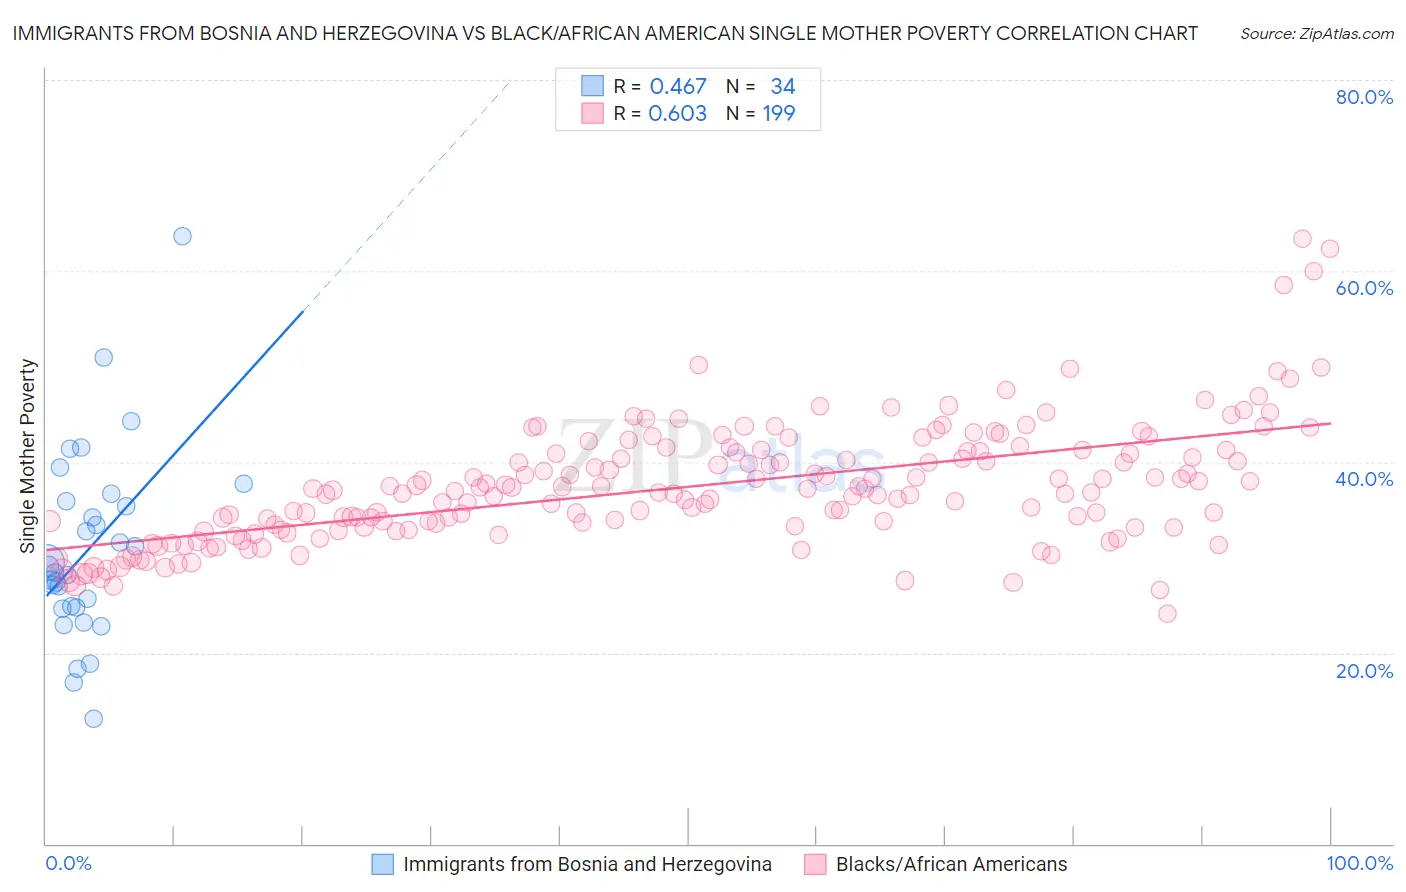 Immigrants from Bosnia and Herzegovina vs Black/African American Single Mother Poverty